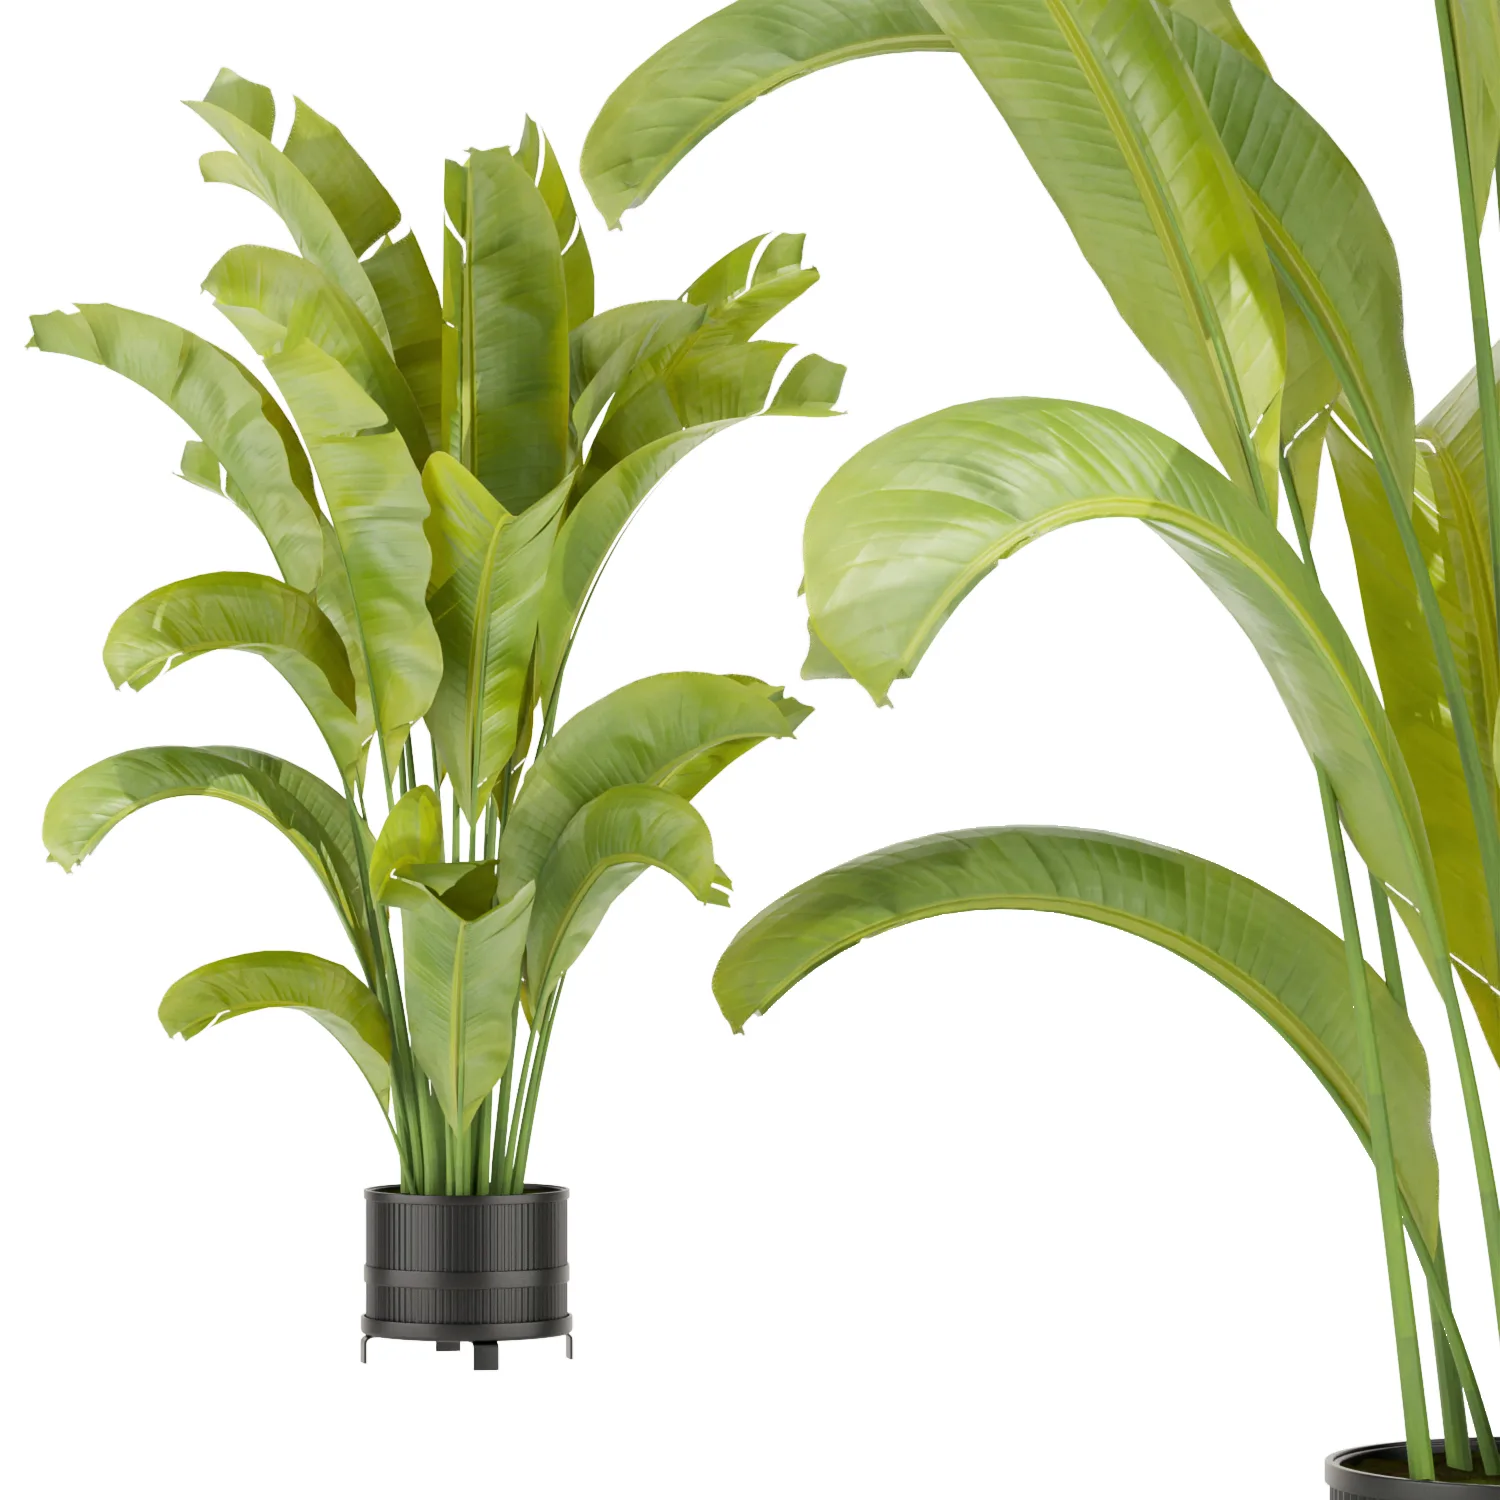 Collection plant vol 373 - indoor - fiddle - banana - Croton - peace - lily - blender - 3dmax - cinema 4d